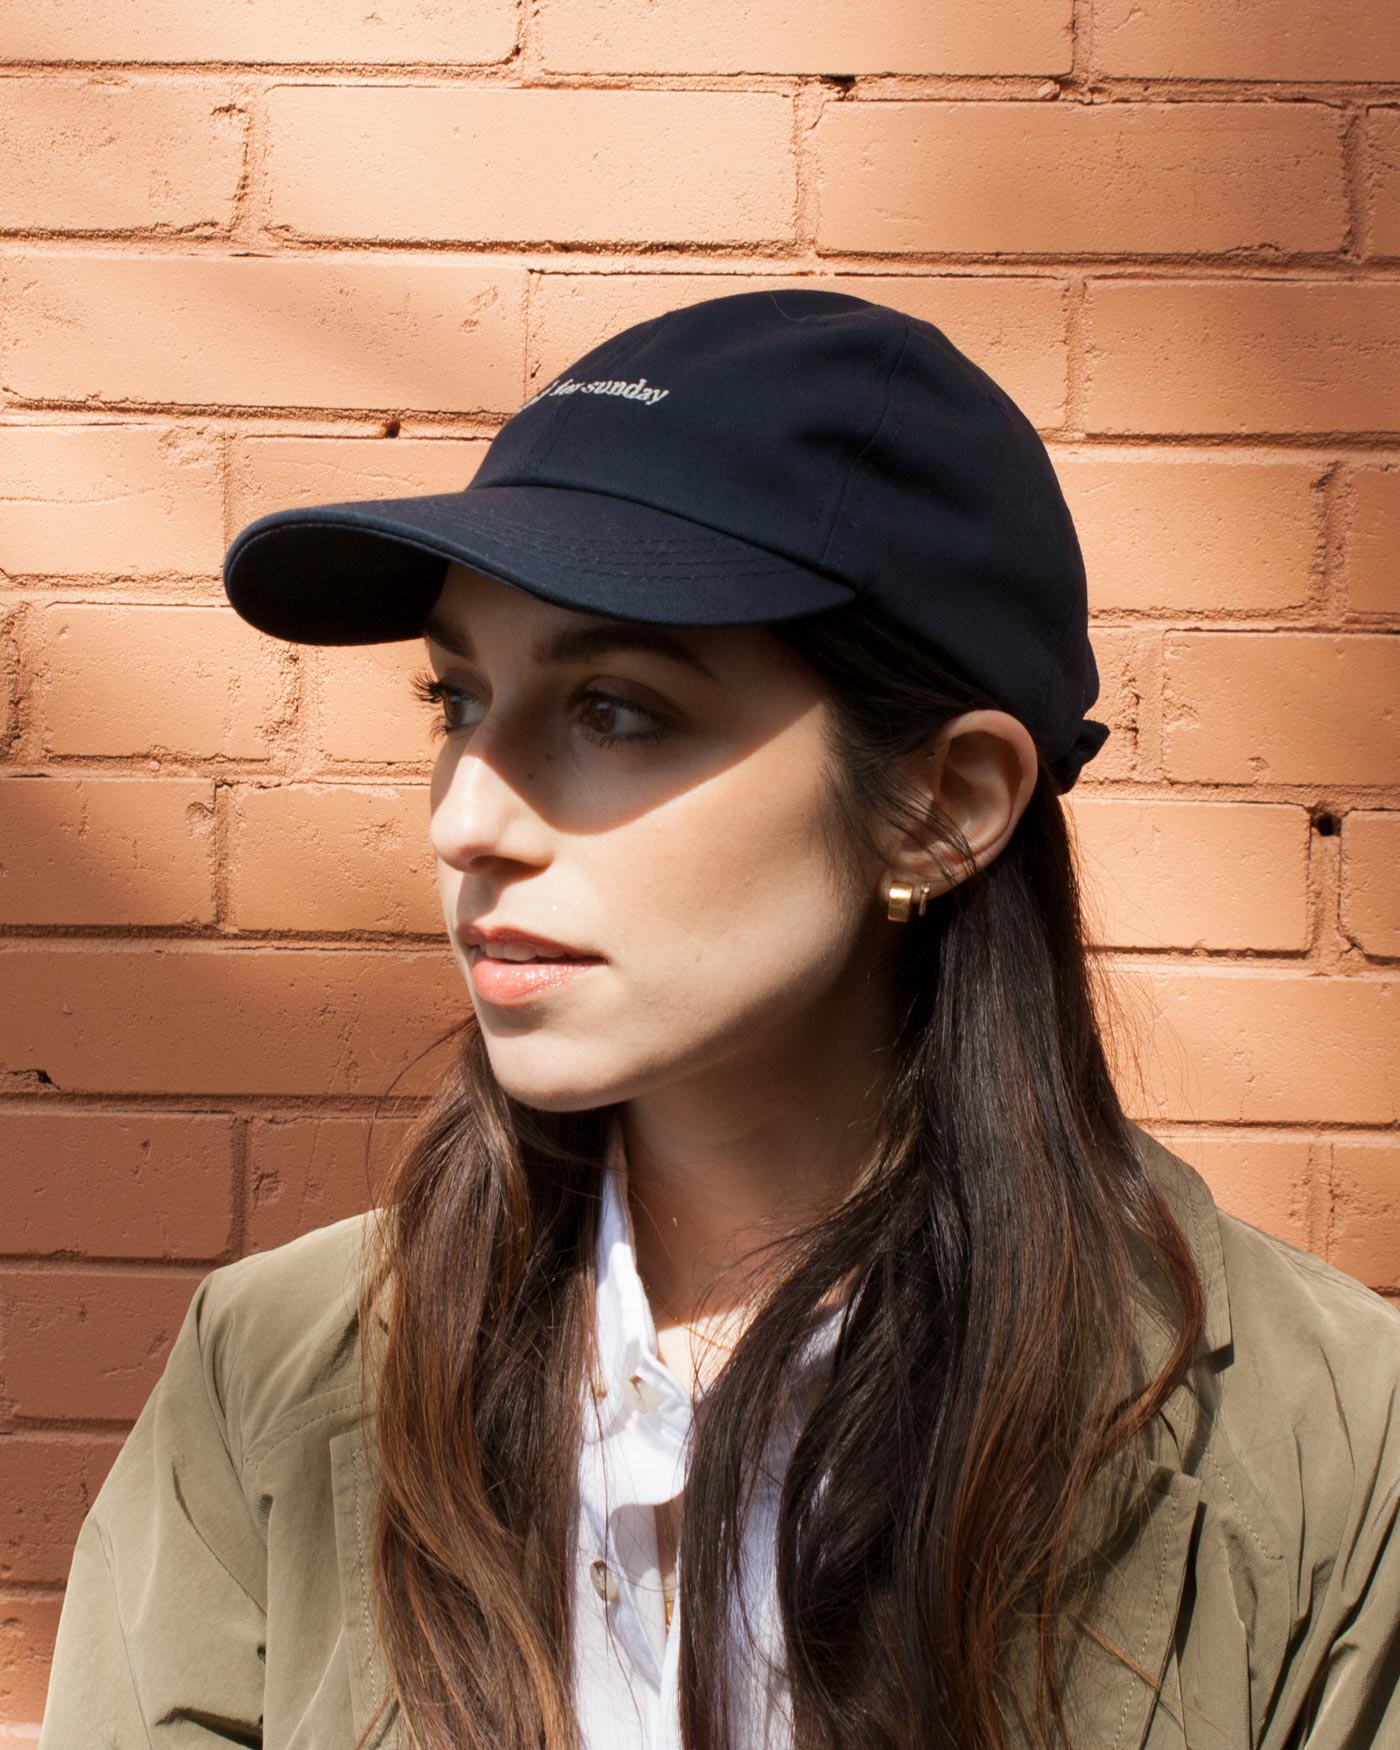 Good for Sunday Organic Cotton Dad Hat (Brown)